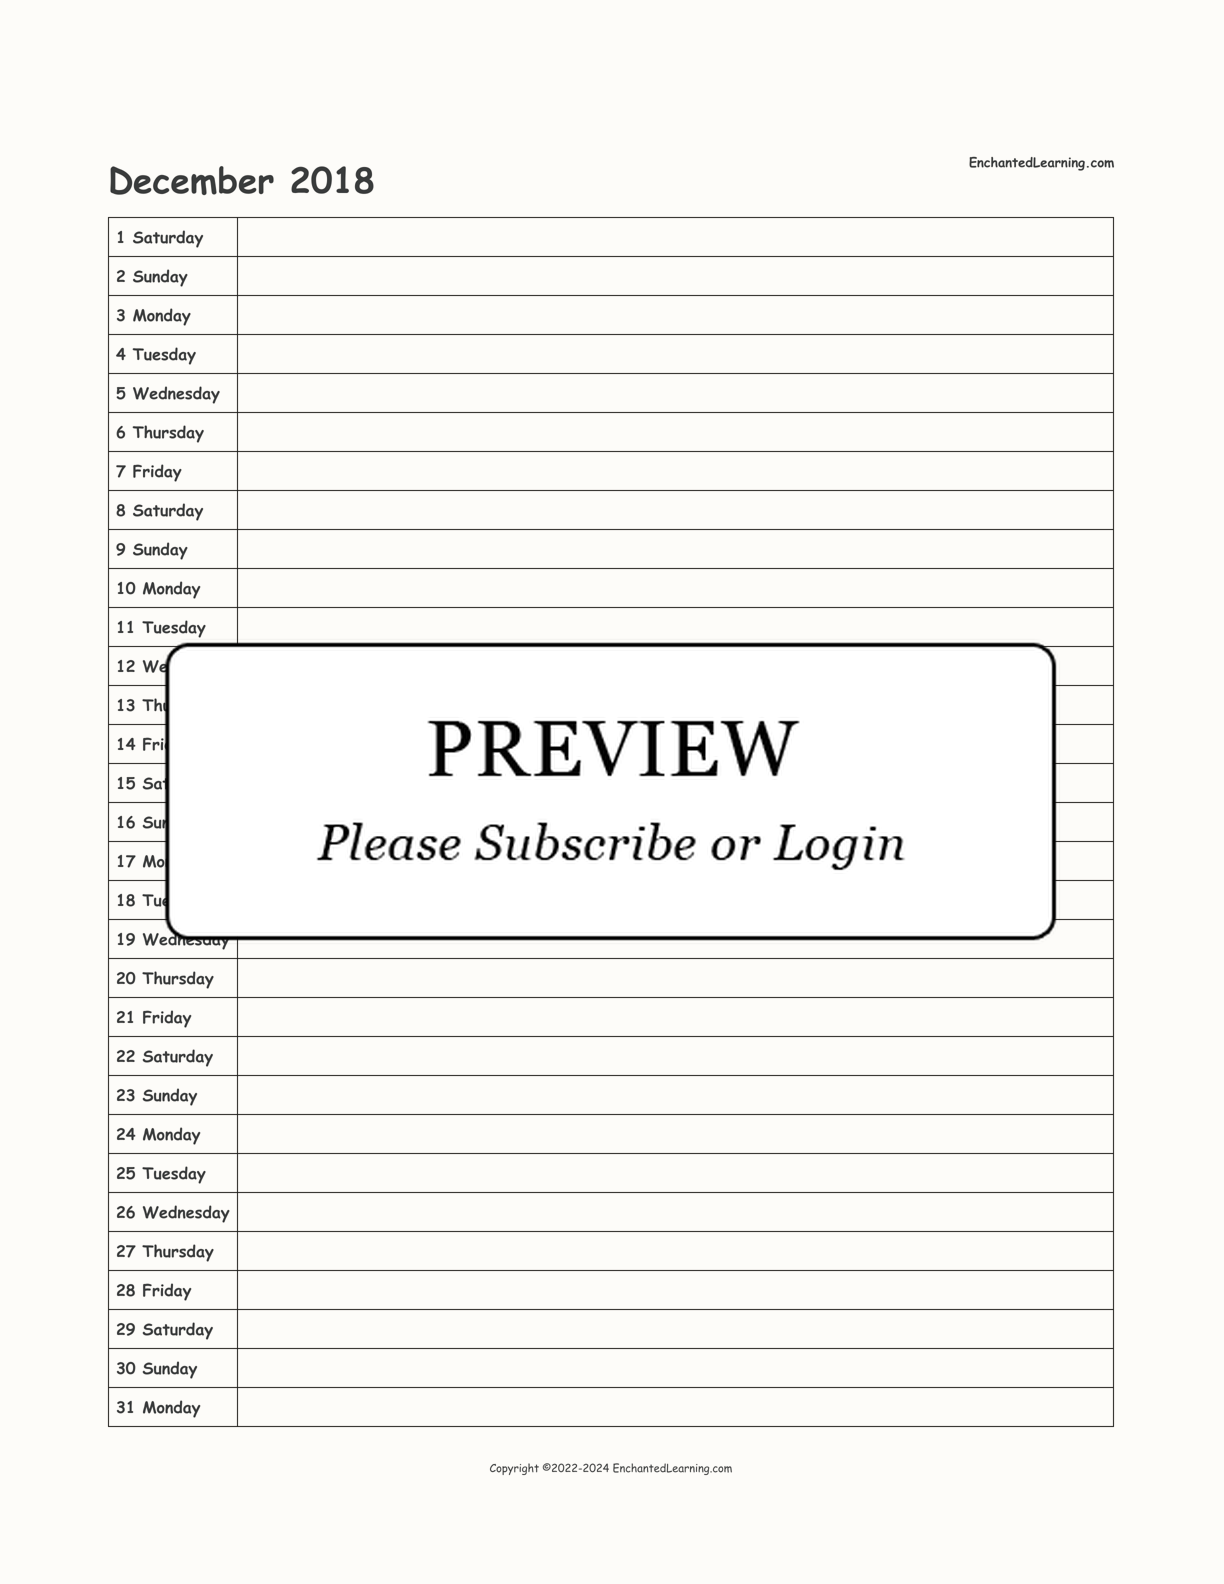 2018 Scheduling Calendar interactive printout page 12